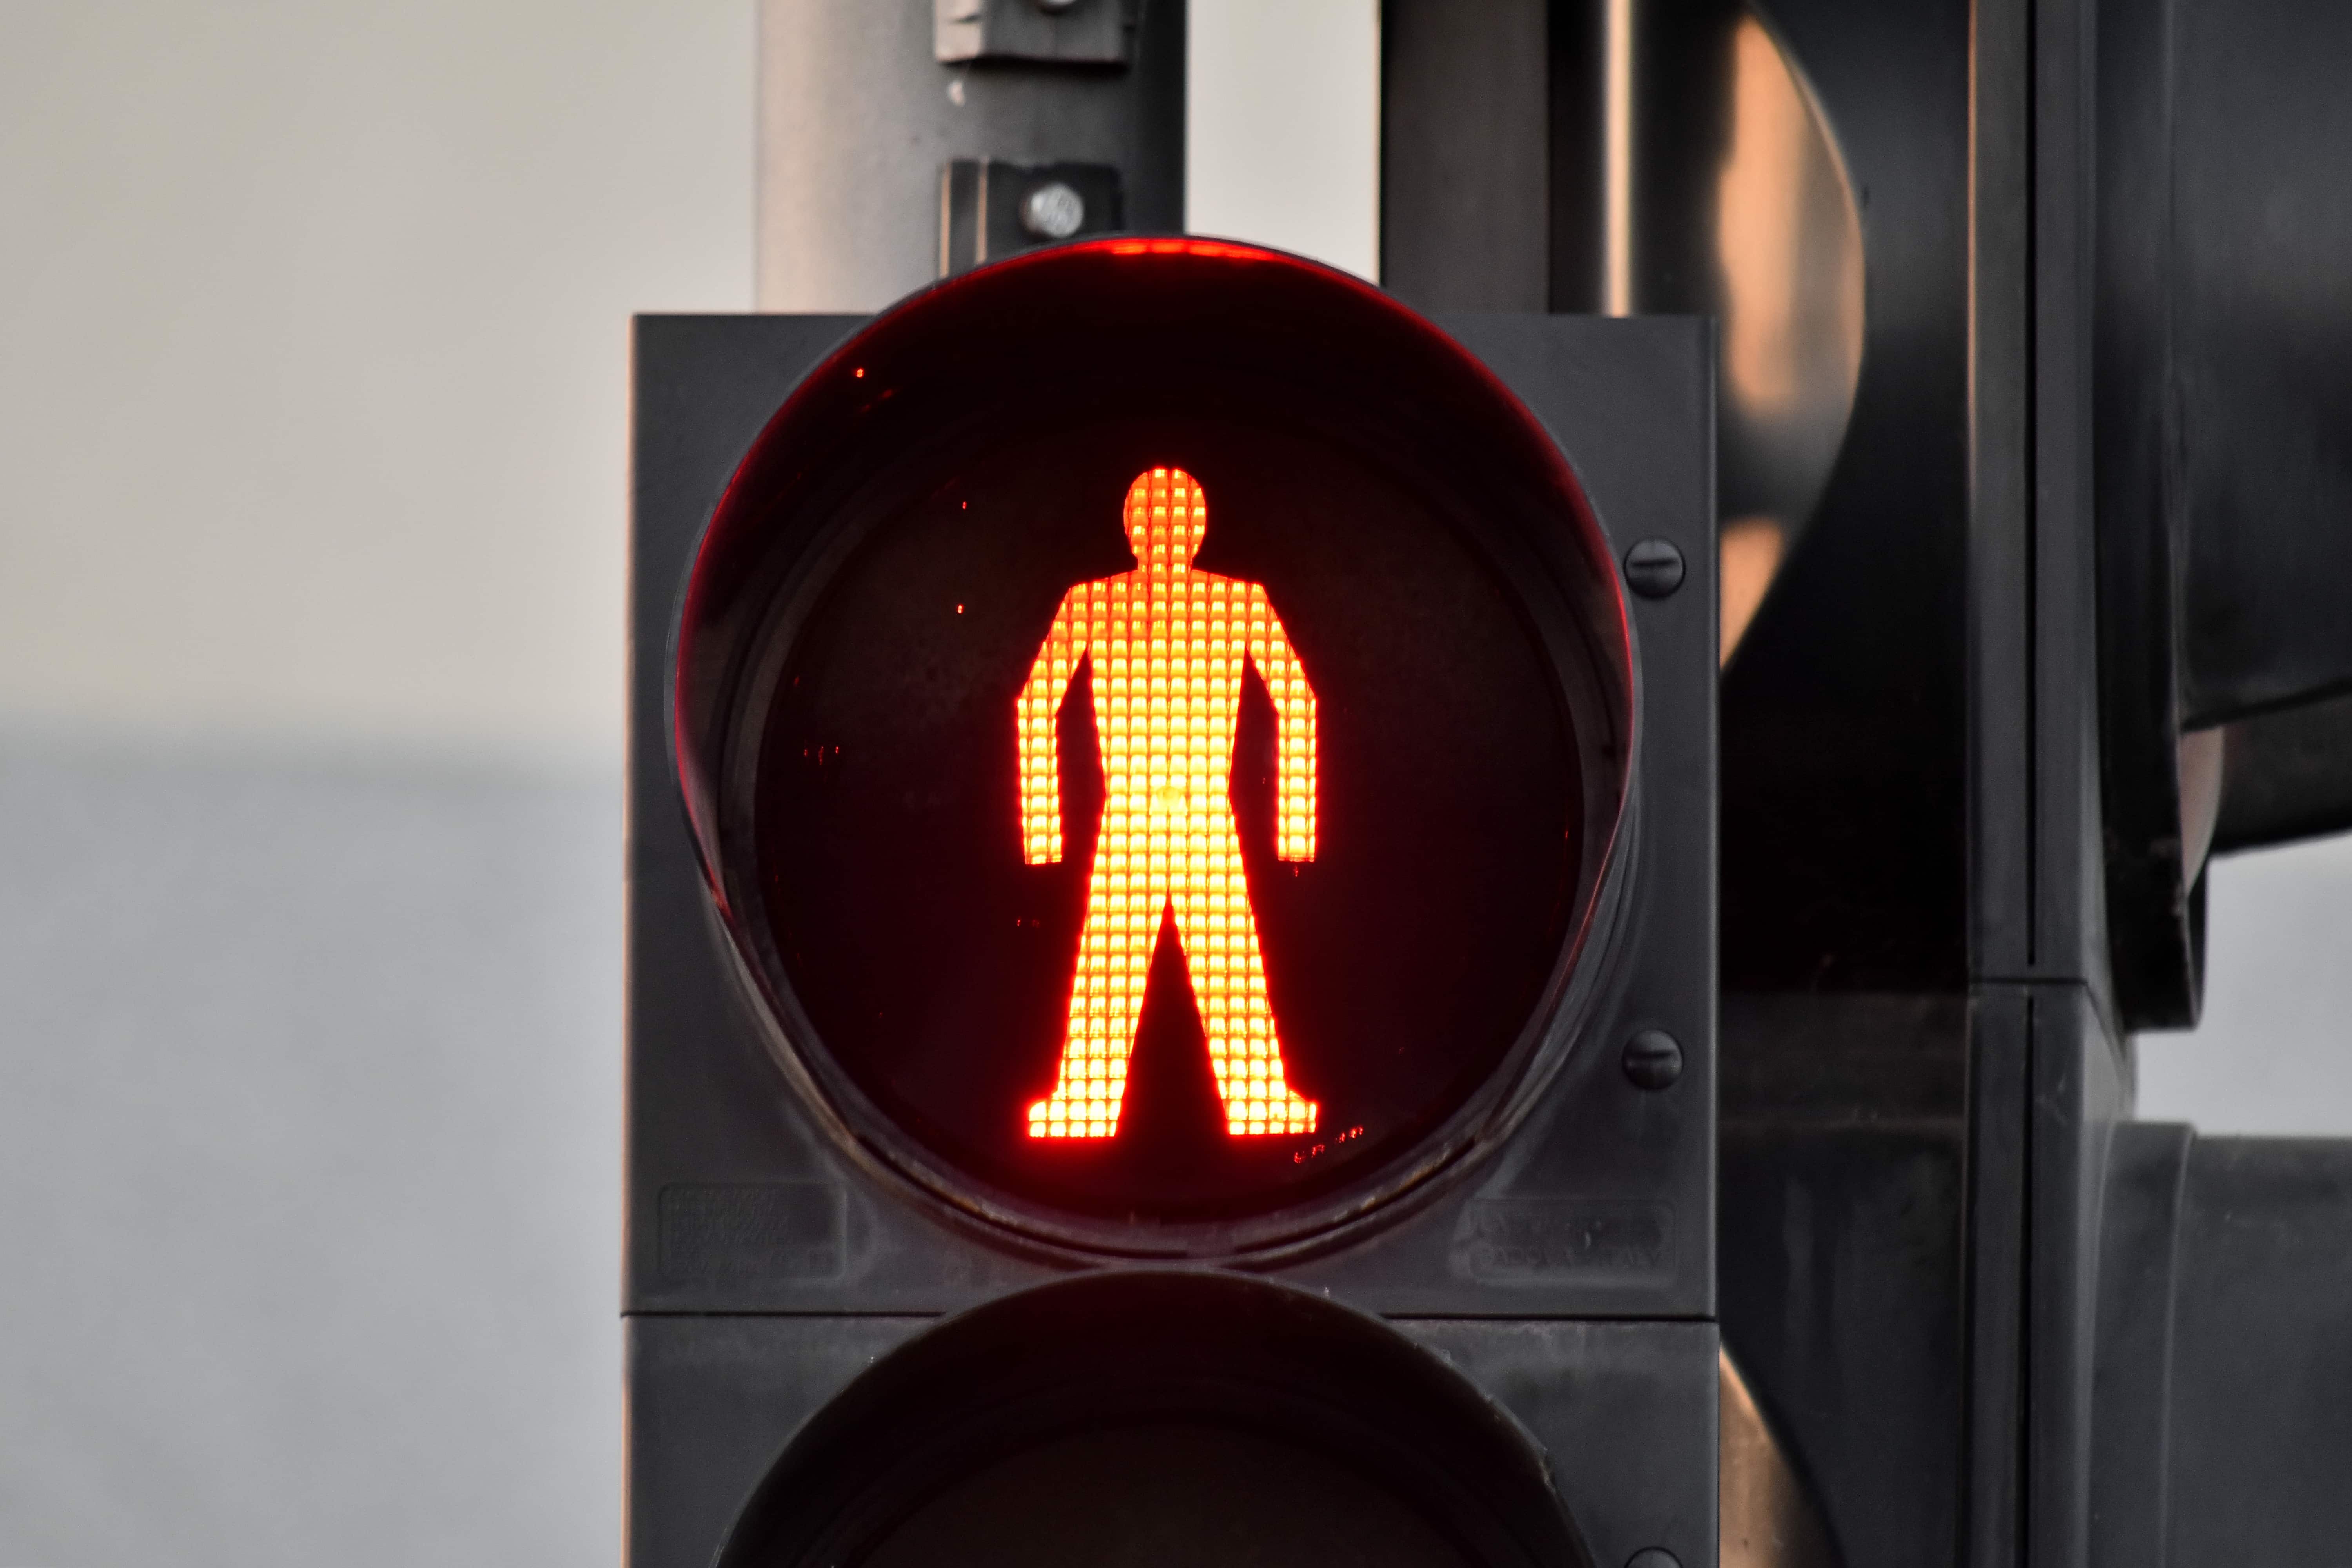 Free picture: electricity, red light, traffic control, traffic light, semaphore, warning, safety, light, intersection, street